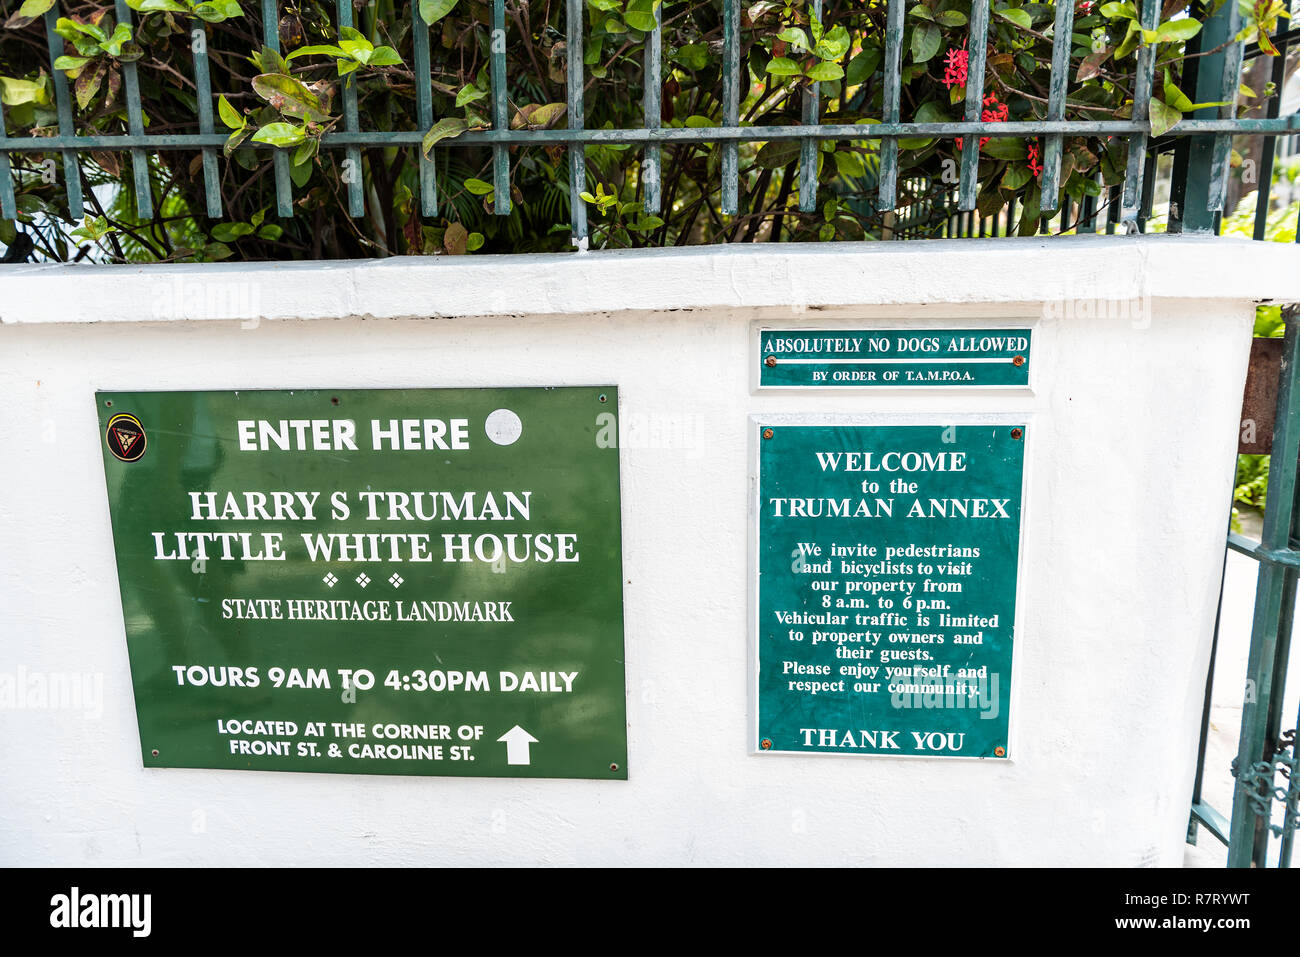 Key West, USA - May 1, 2018: Harry Truman little white house historic landmark on street architecture with tourist information sign closeup in Florida Stock Photo